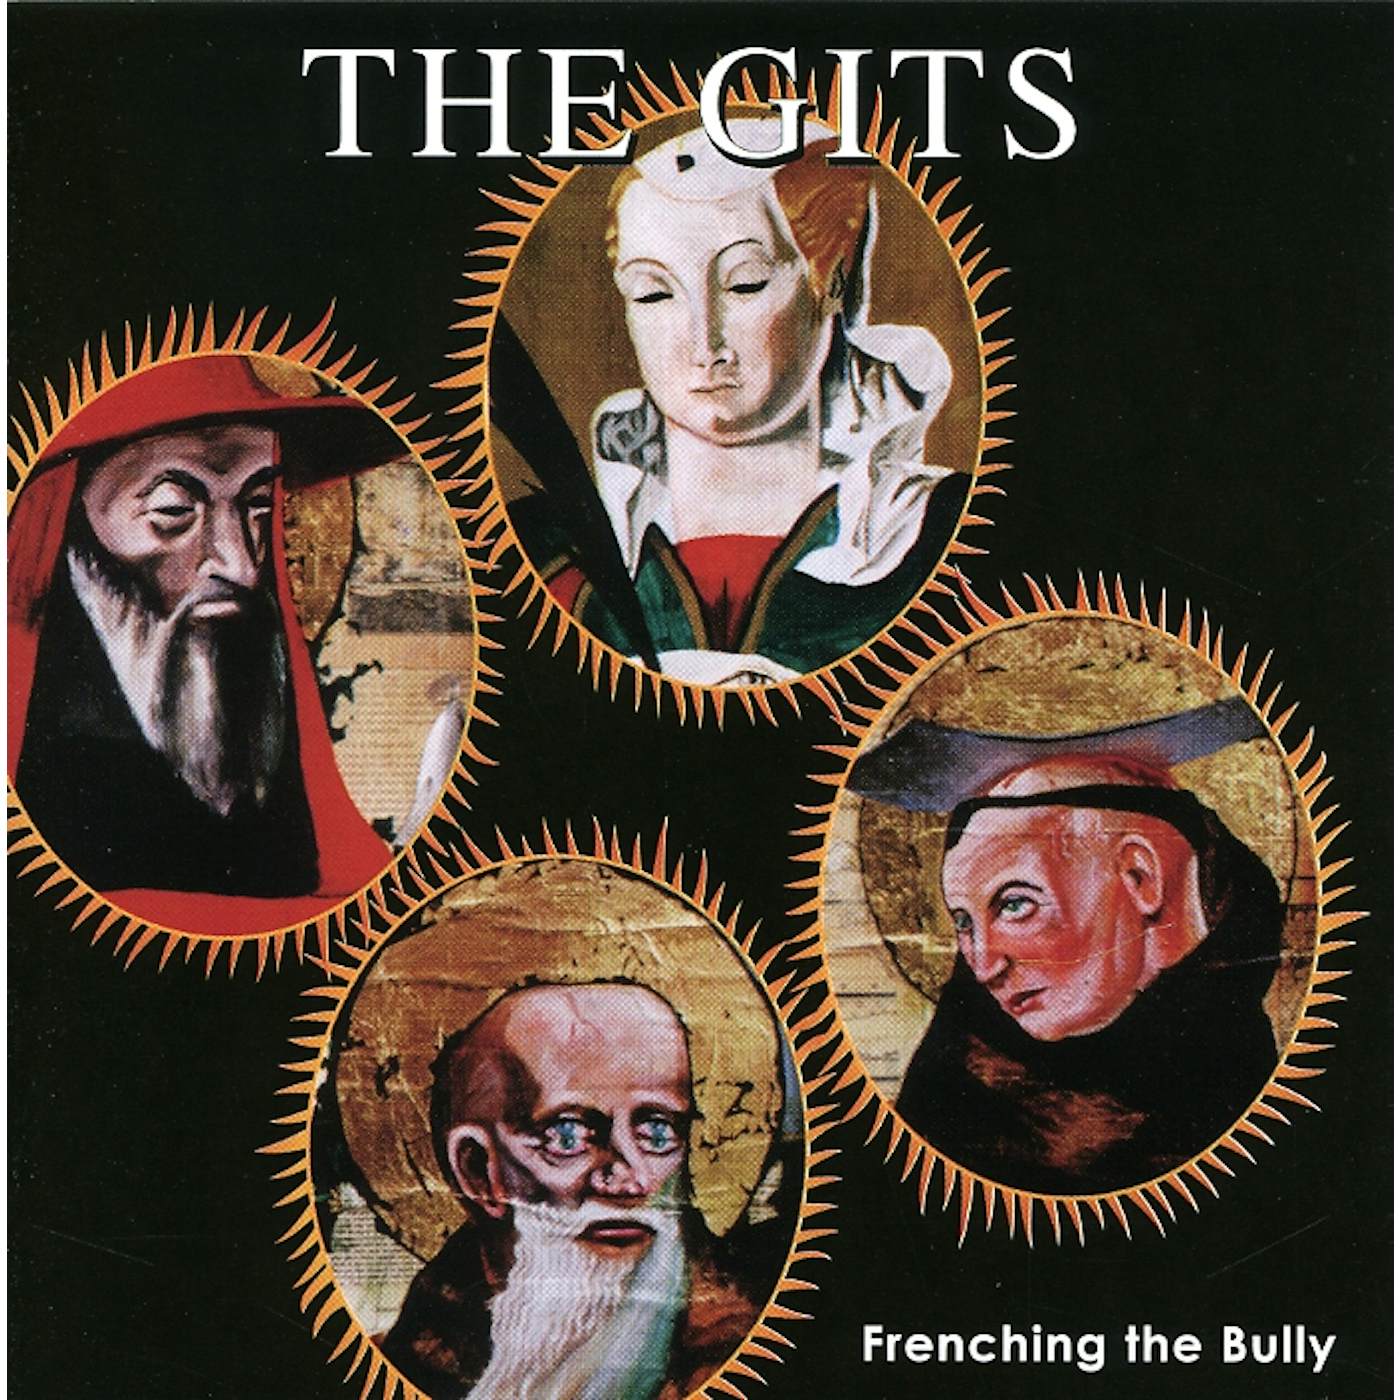 GITS FRENCHING THE BULLY CD